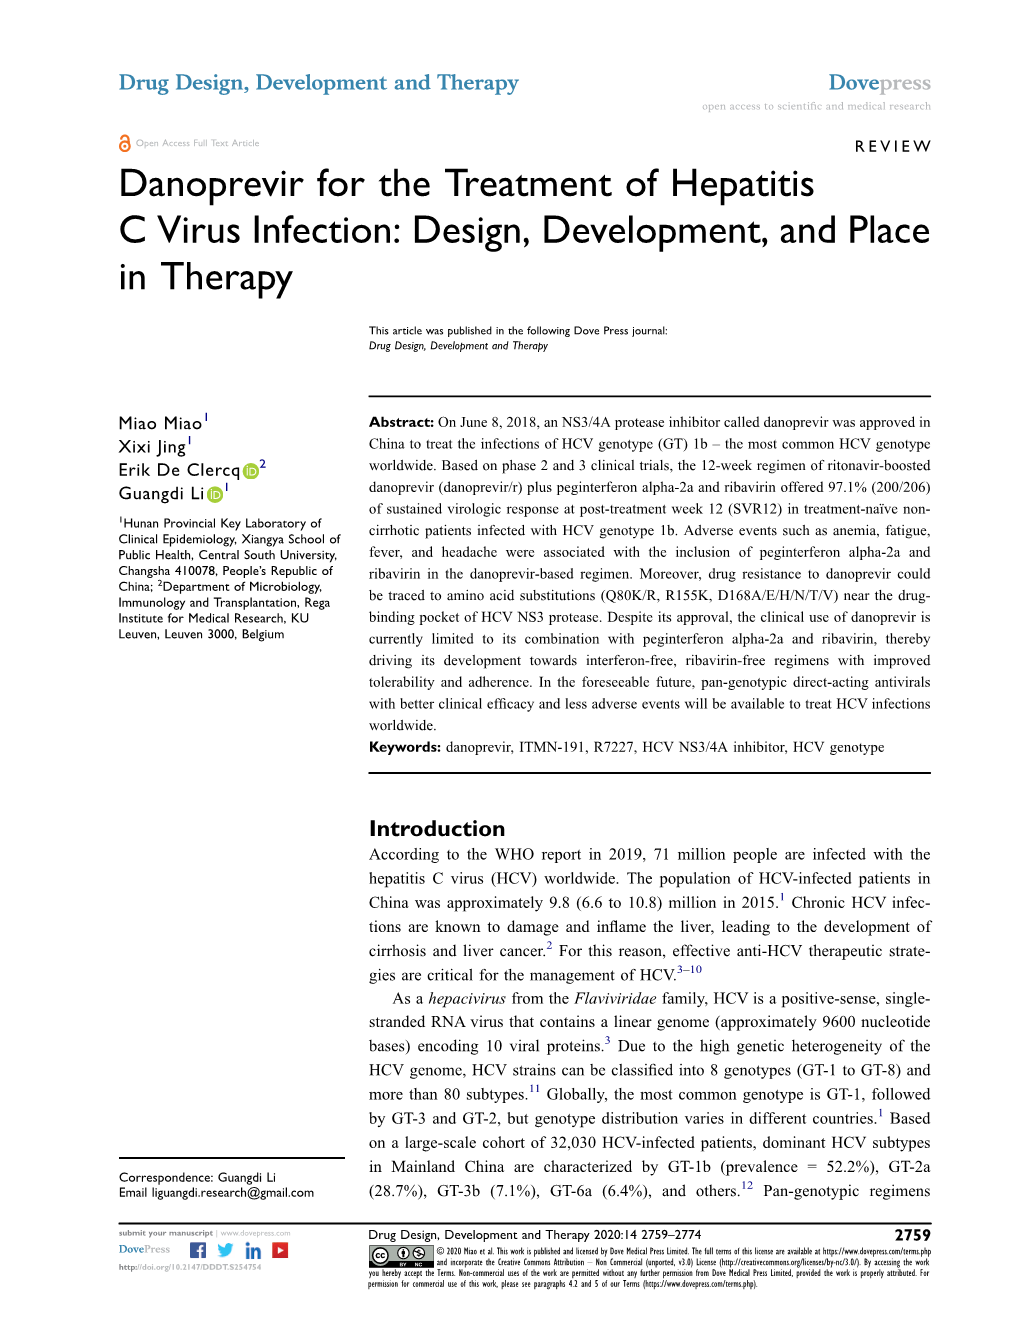 Danoprevir for the Treatment of Hepatitis C Virus Infection: Design, Development, and Place in Therapy